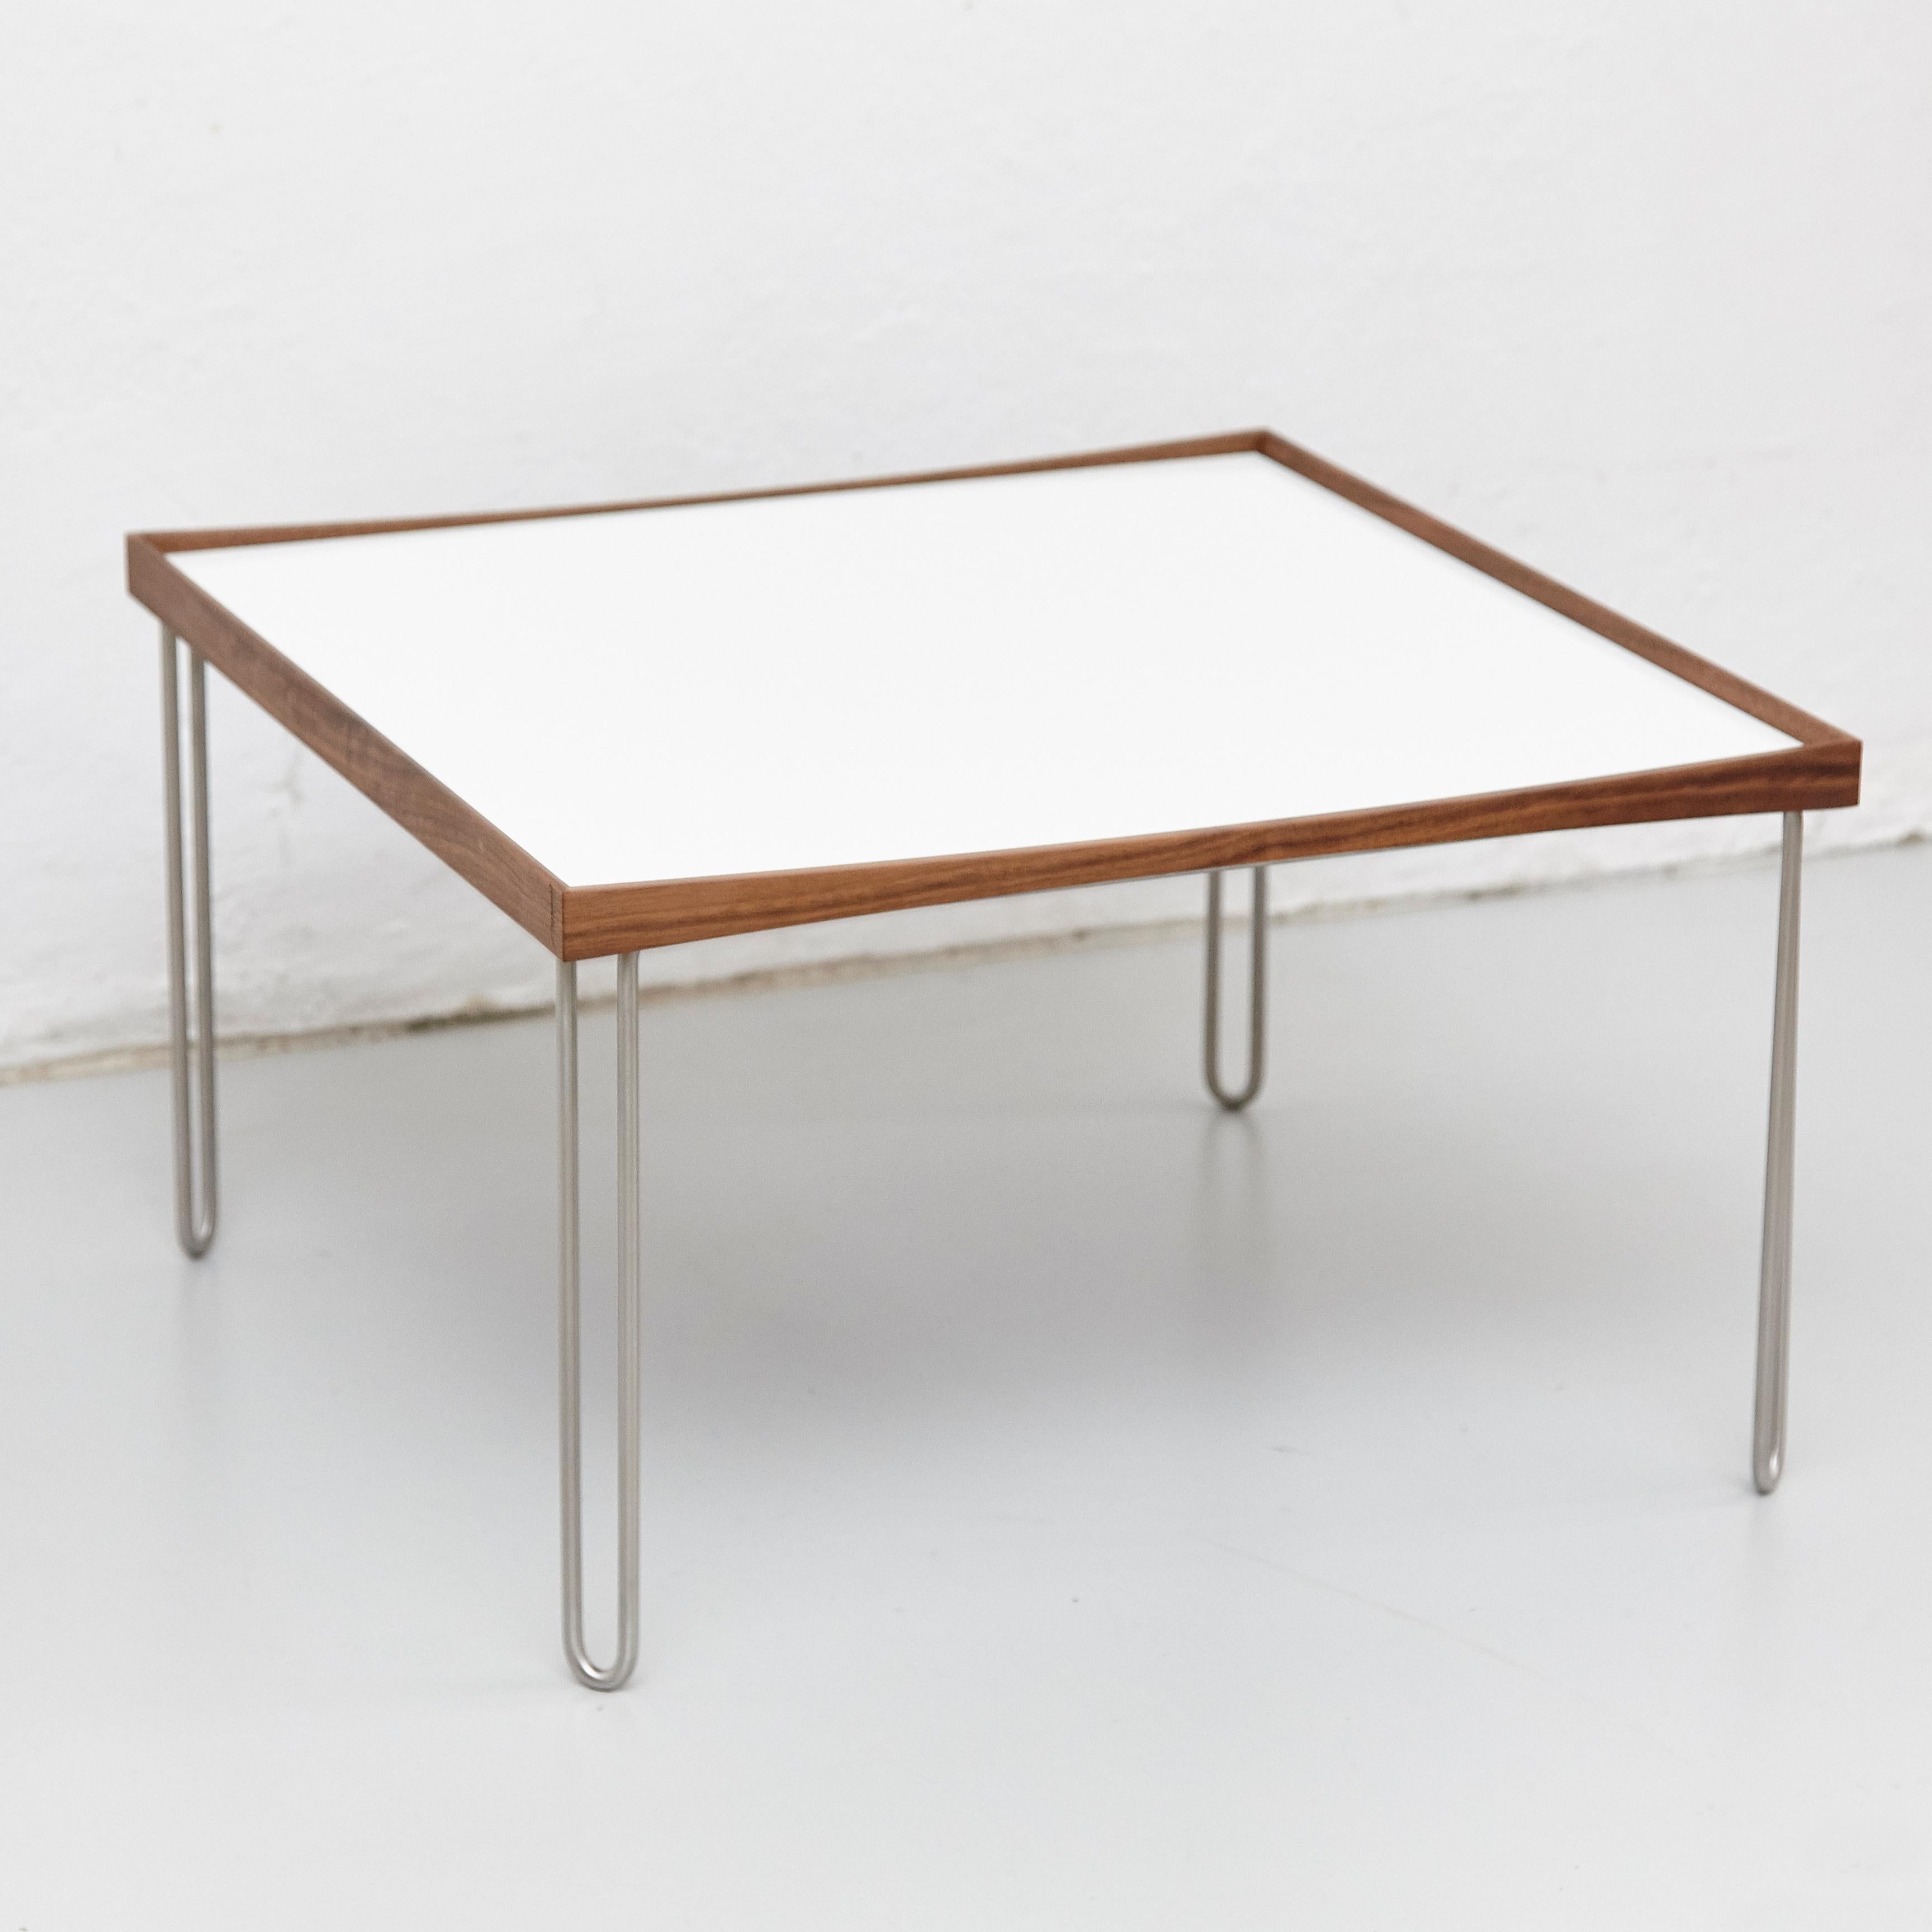 Finn Juhl Tray Table, Wood, High Gloss Black and White Laminate and Steel 1